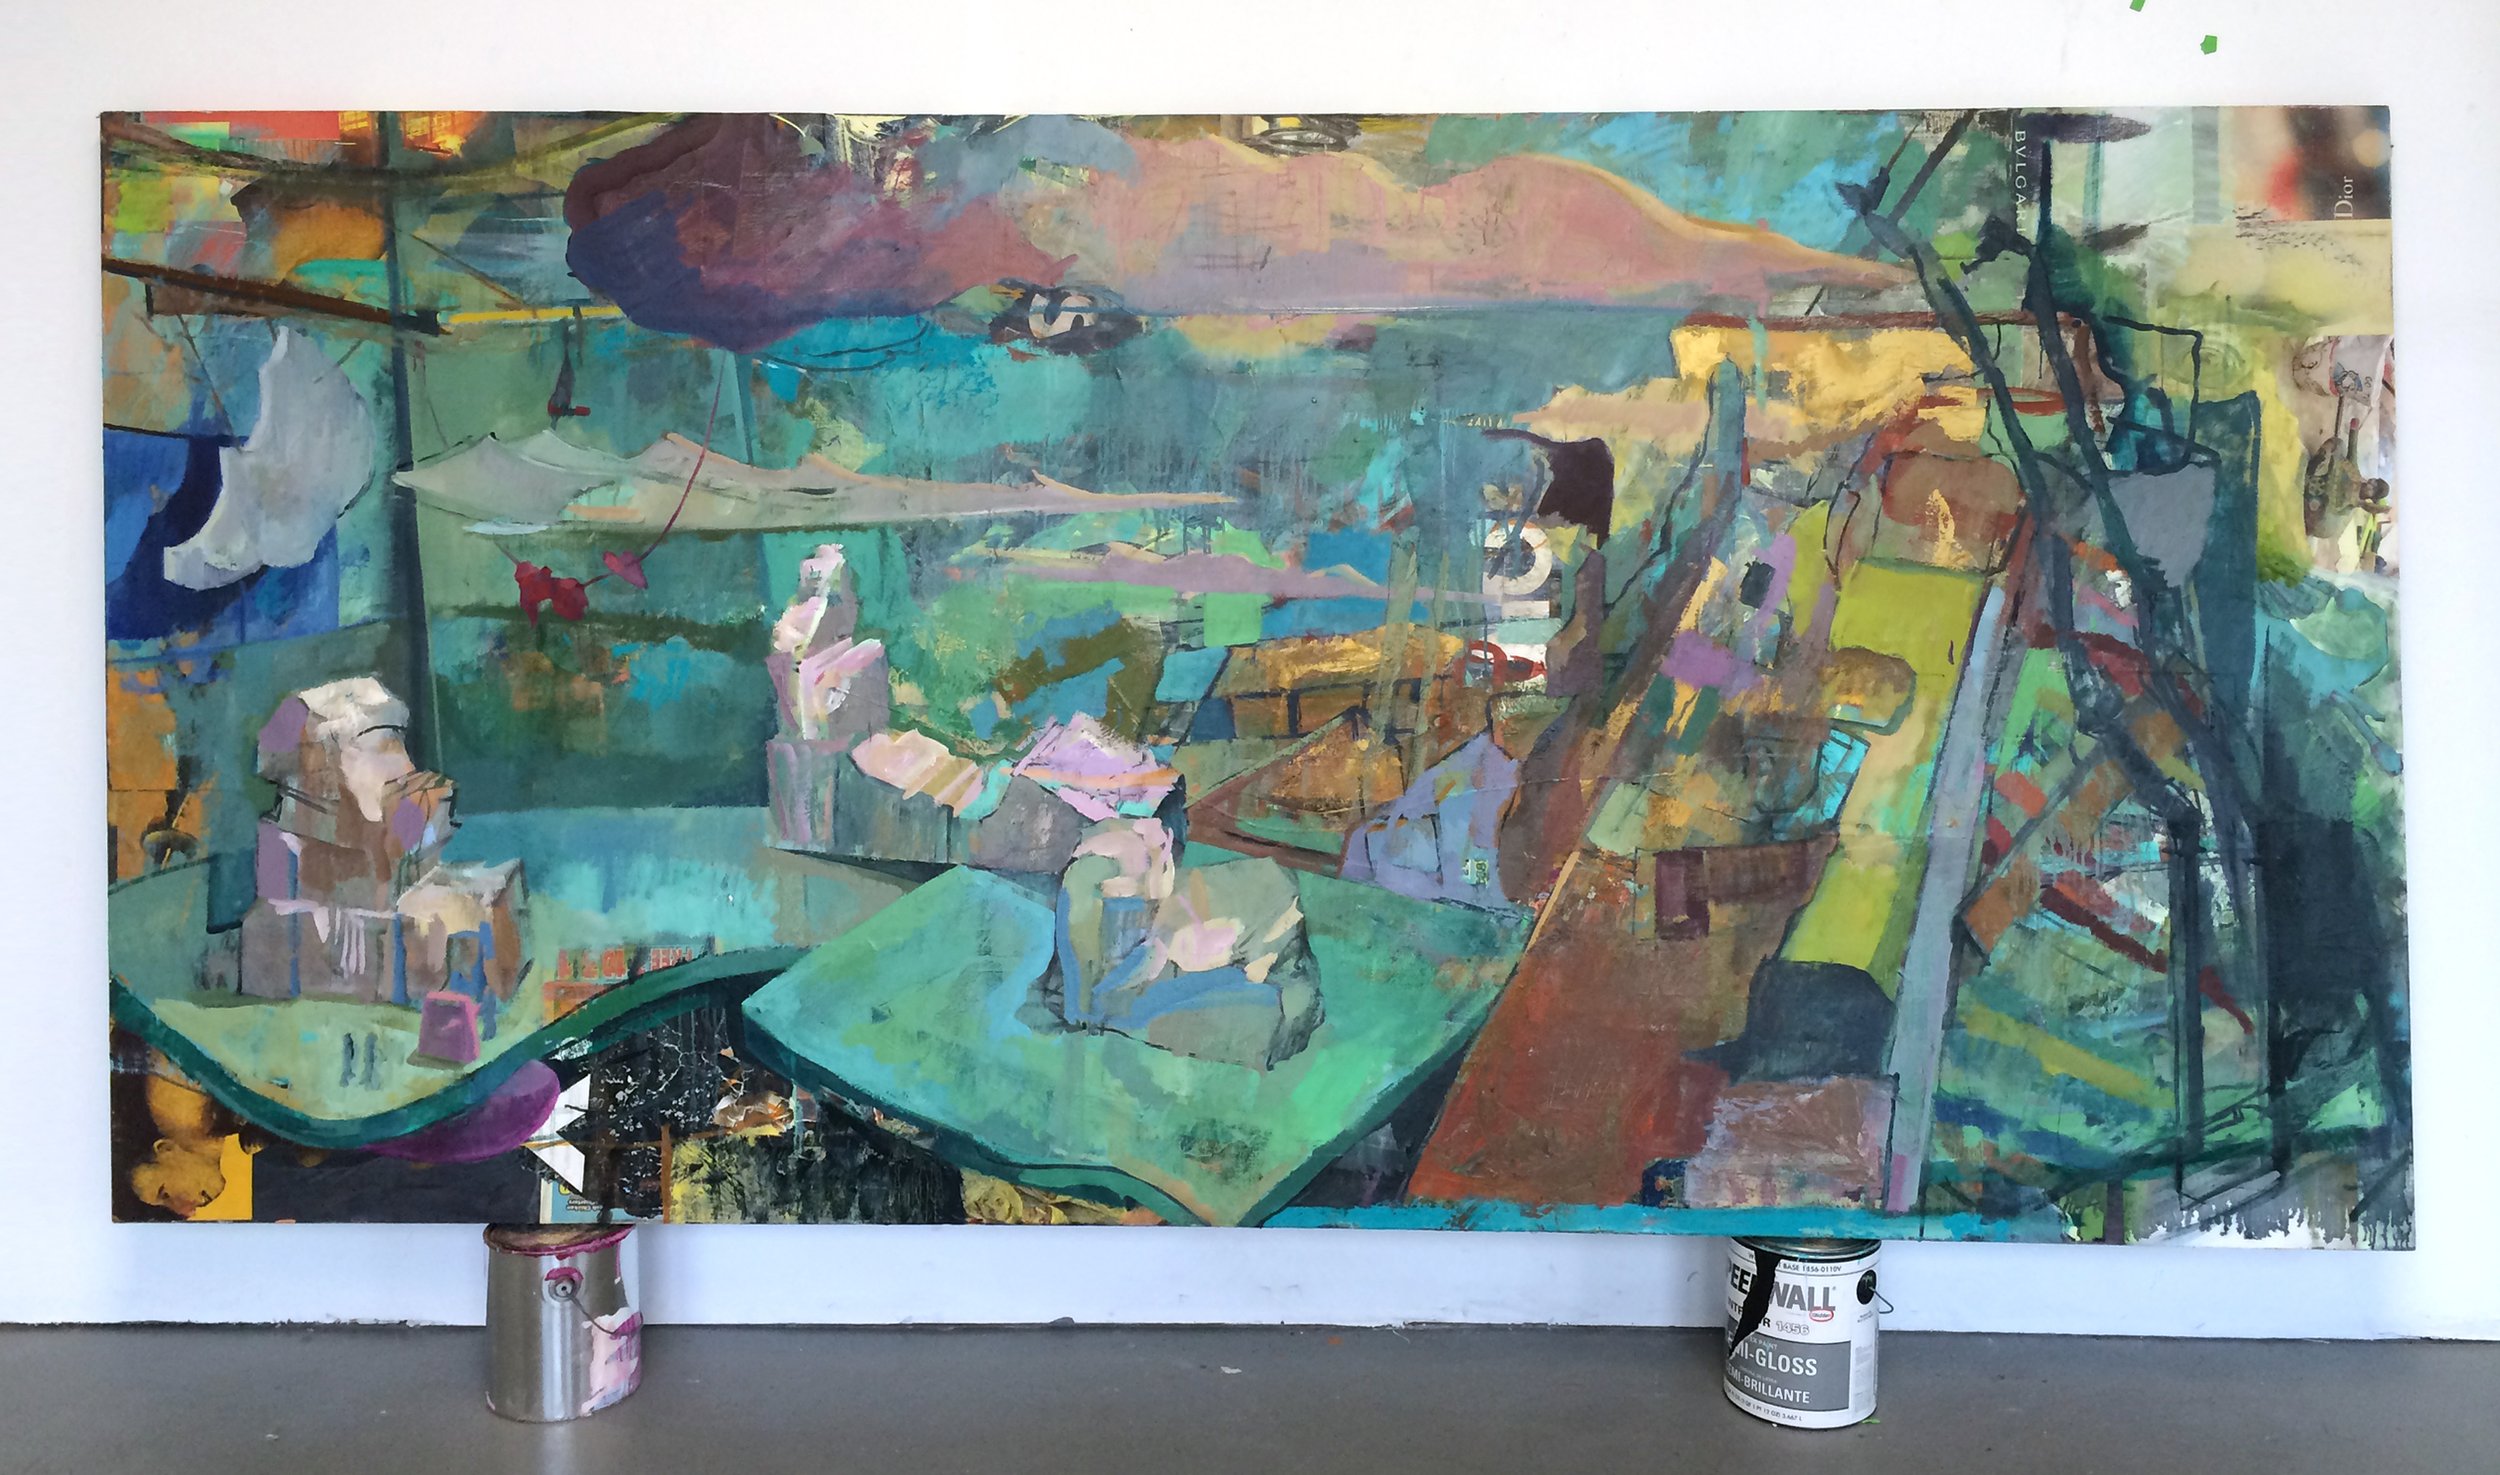    A Vision of Future Ambition,   36 x 96, oil on canvas, 2015 